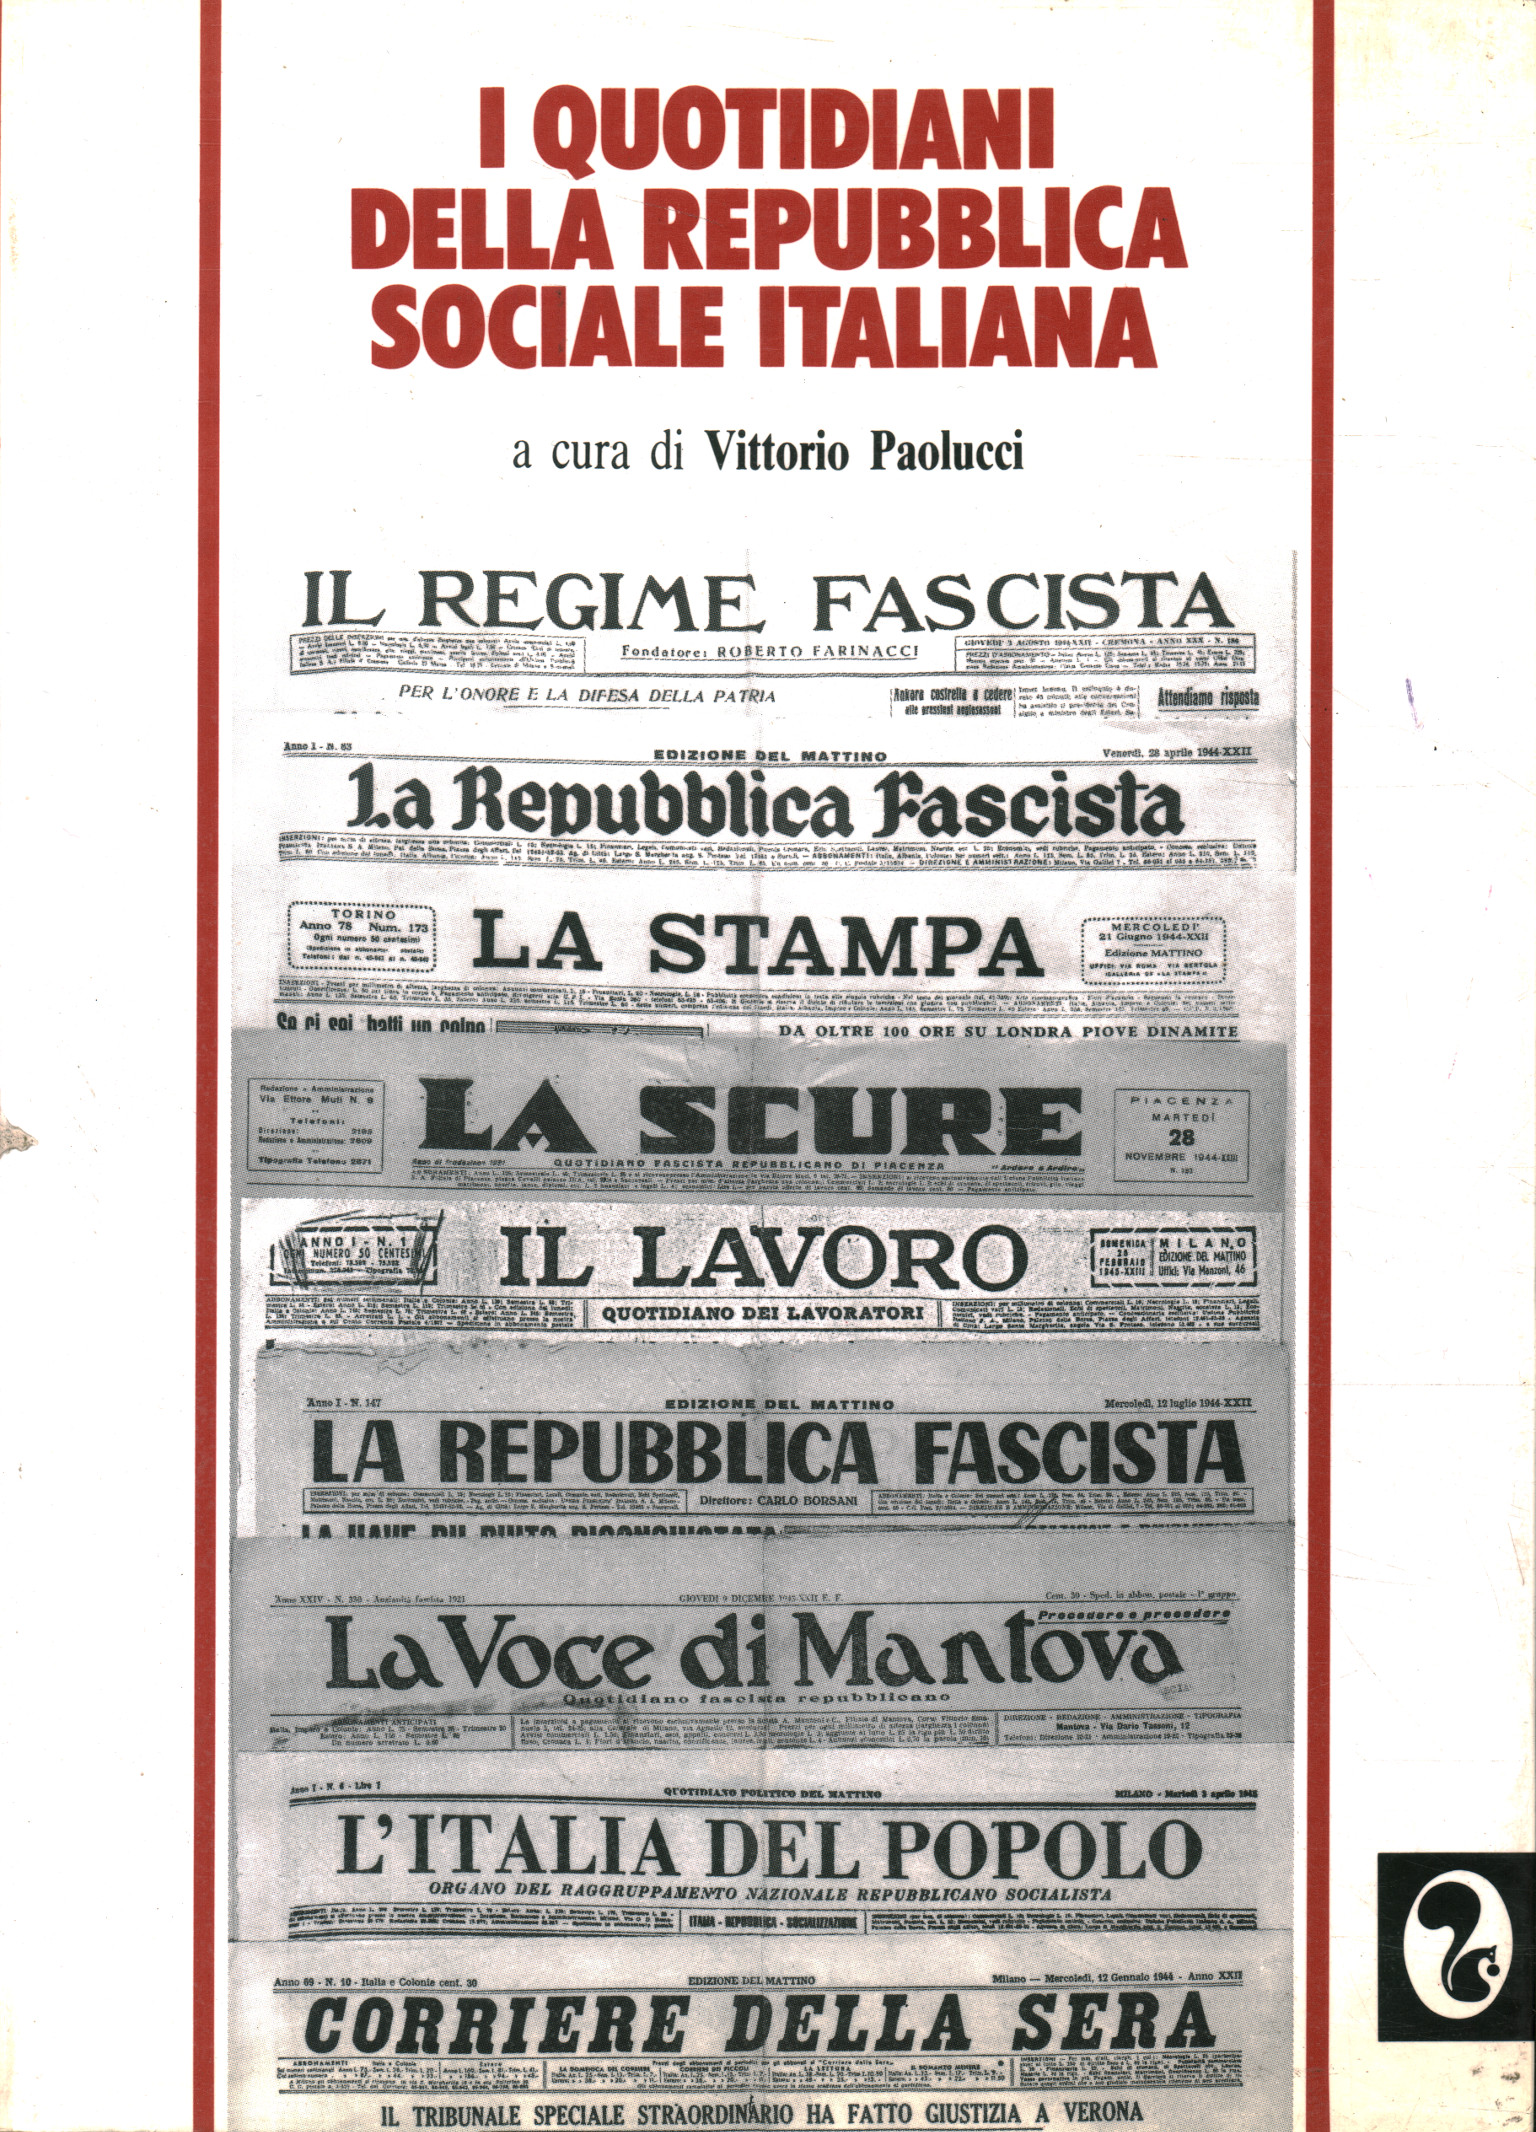 The newspapers of the Social Republic it